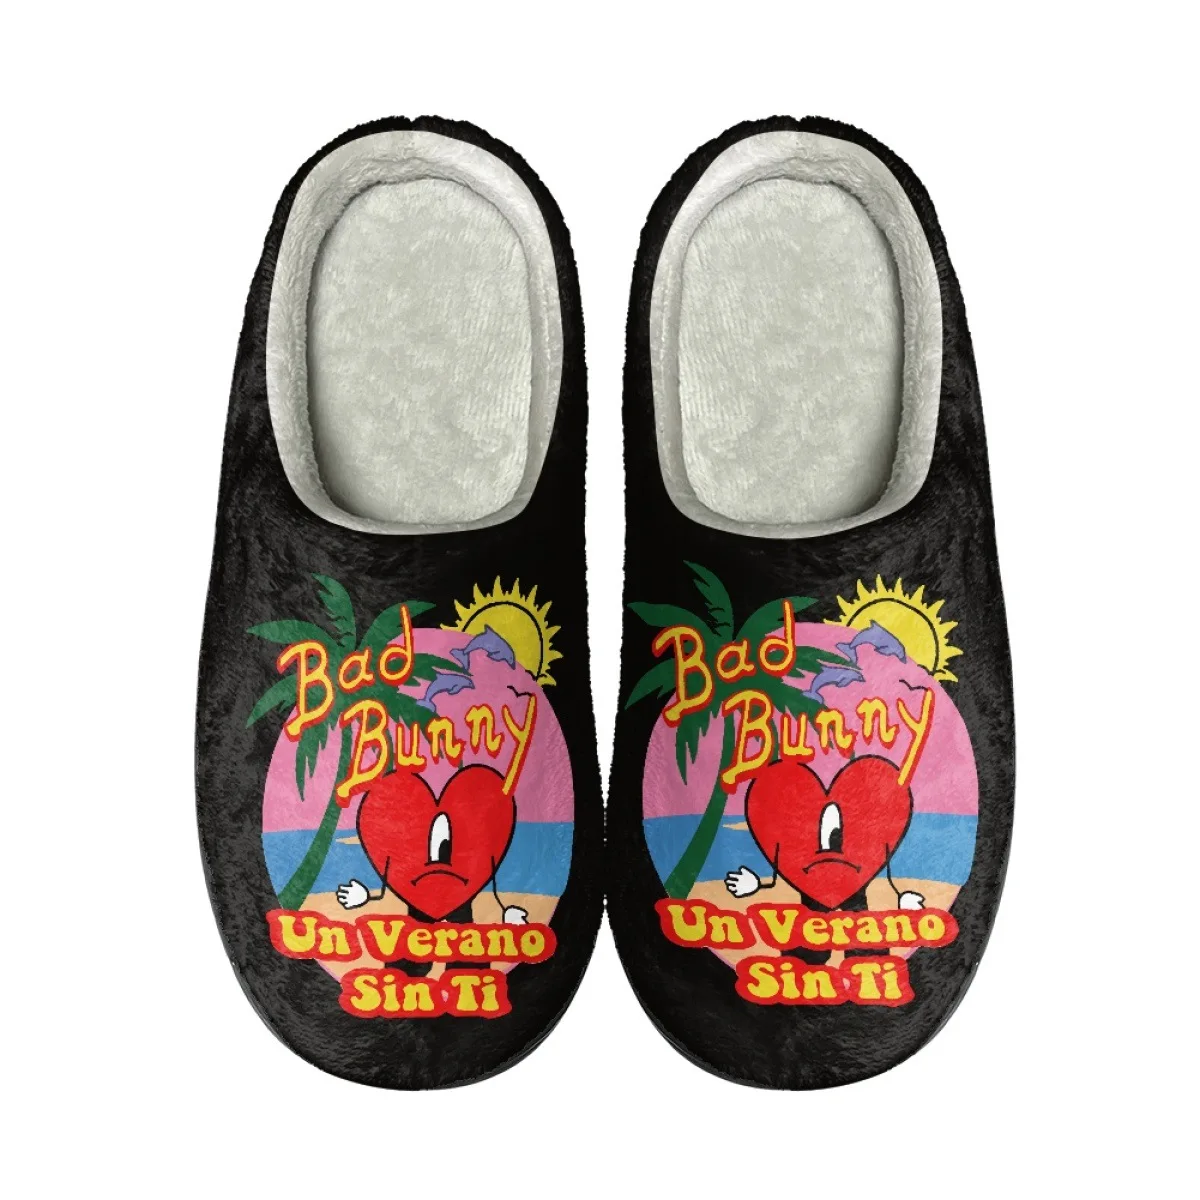 

Bad Bunny UN VERANO SIN Print Design Home Cotton Custom Slippers Mens Womens Sandals Plush Casual Keep Warm Shoes Thermal Slippe